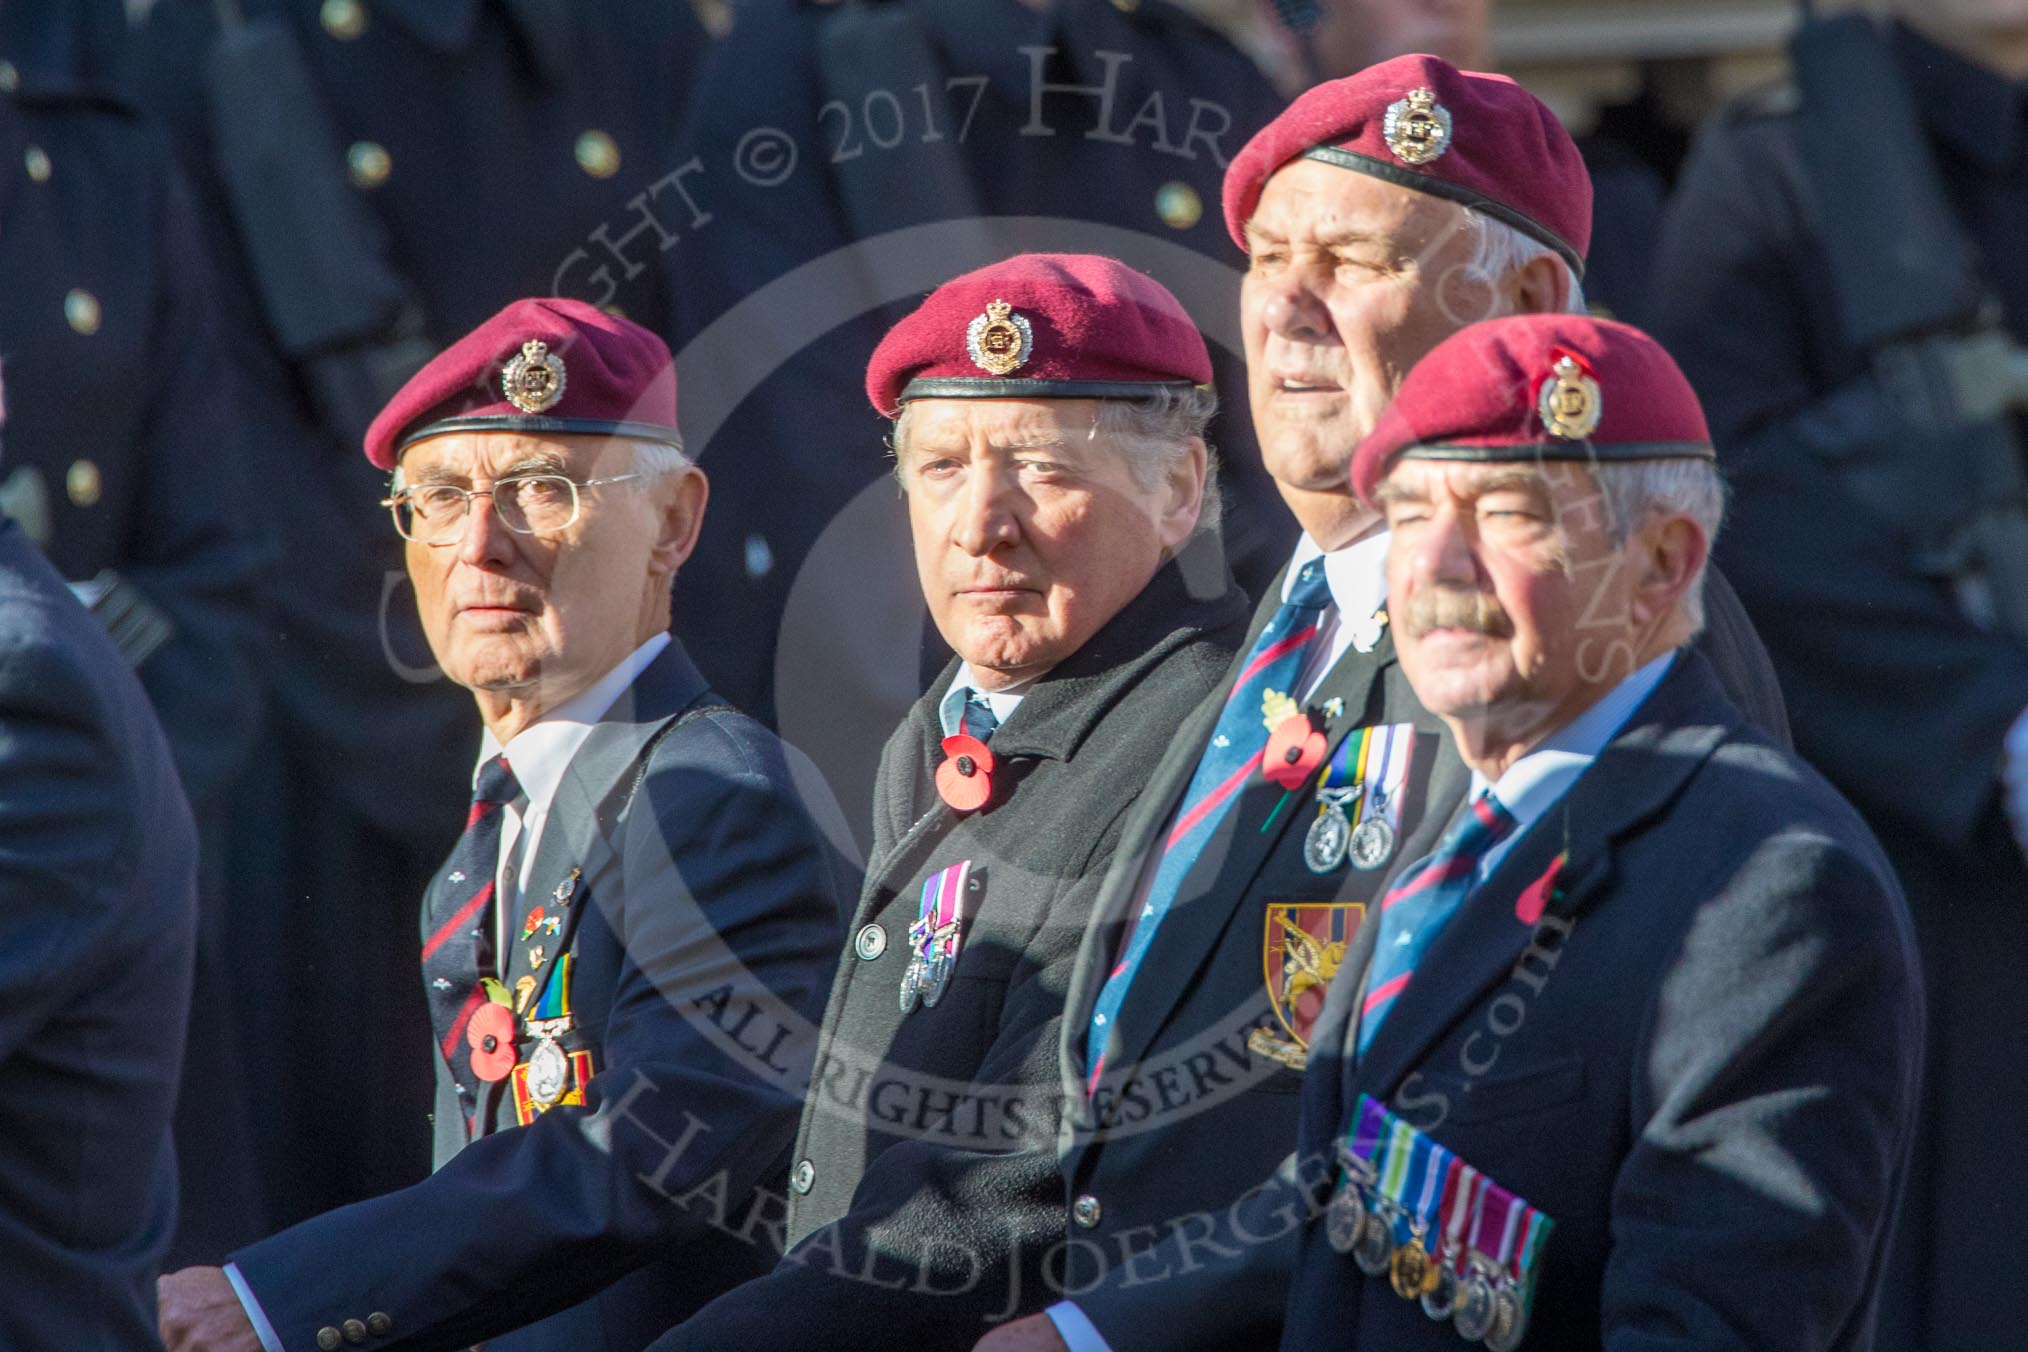 Airborne Engineers Association (Group B31, 20 members) during the Royal British Legion March Past on Remembrance Sunday at the Cenotaph, Whitehall, Westminster, London, 11 November 2018, 12:12.